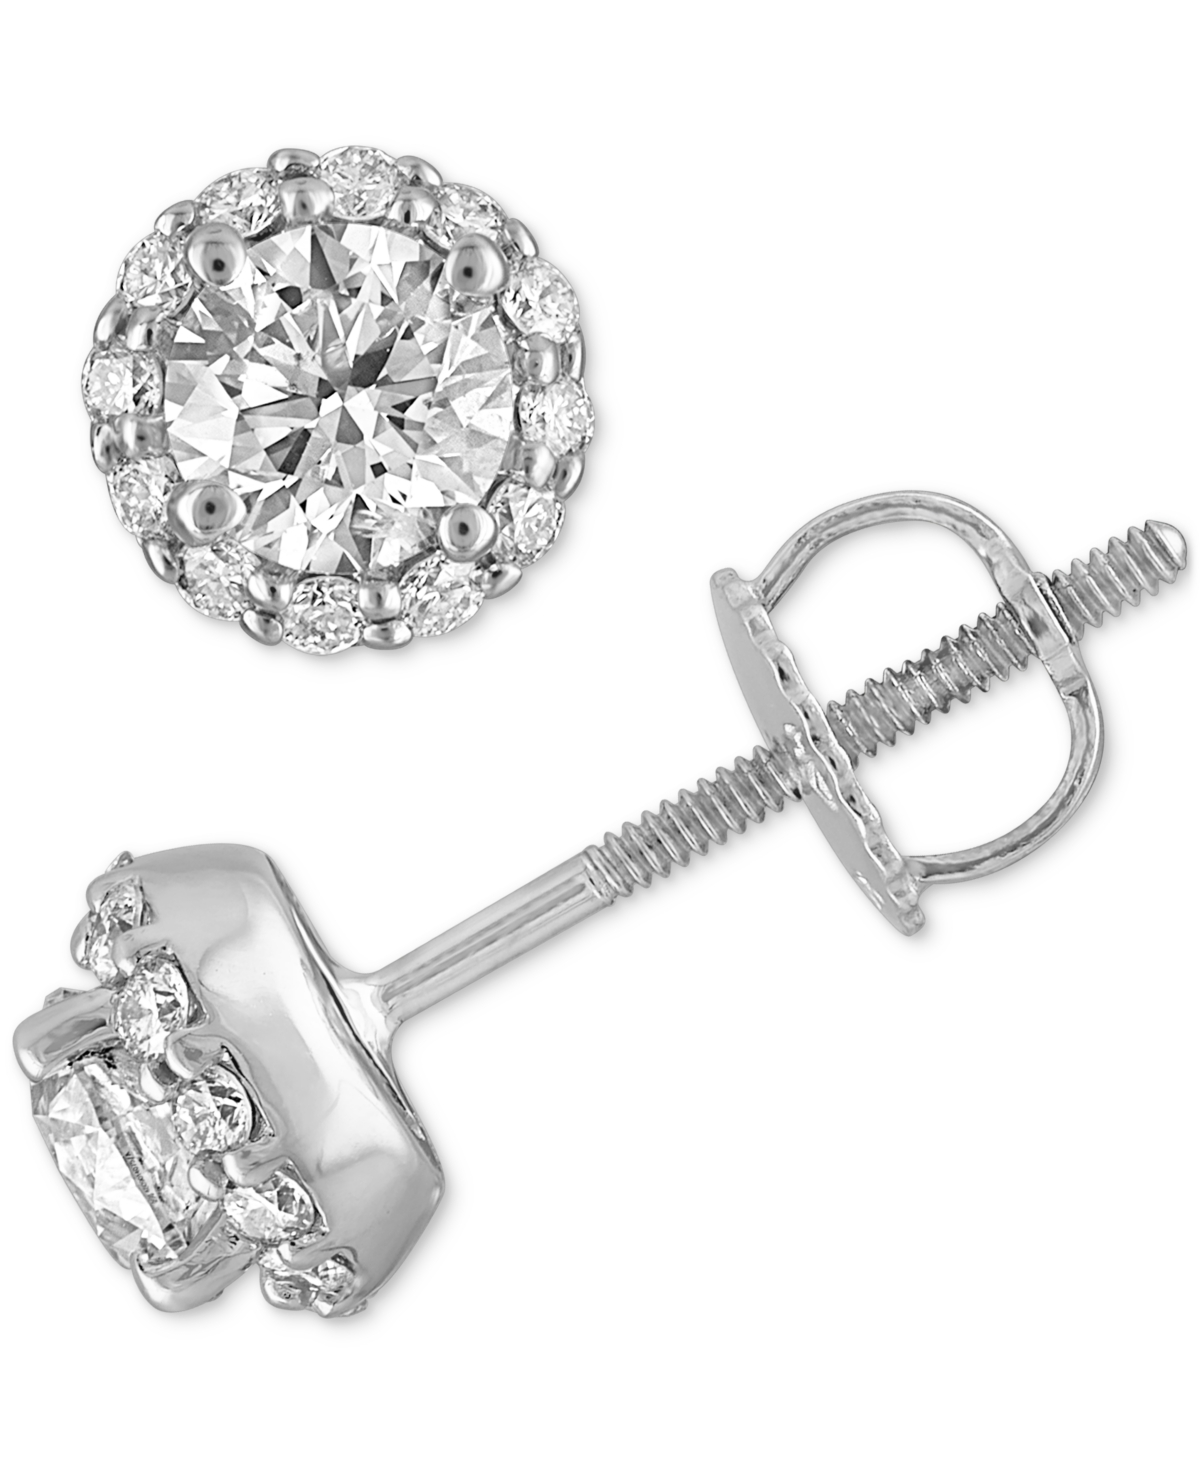 Certified Diamond Halo Stud Earrings (1 ct. t.w.) in 14k White Gold Featuring Diamonds from De Beers Code of Origin, Created for Macy's - Whit